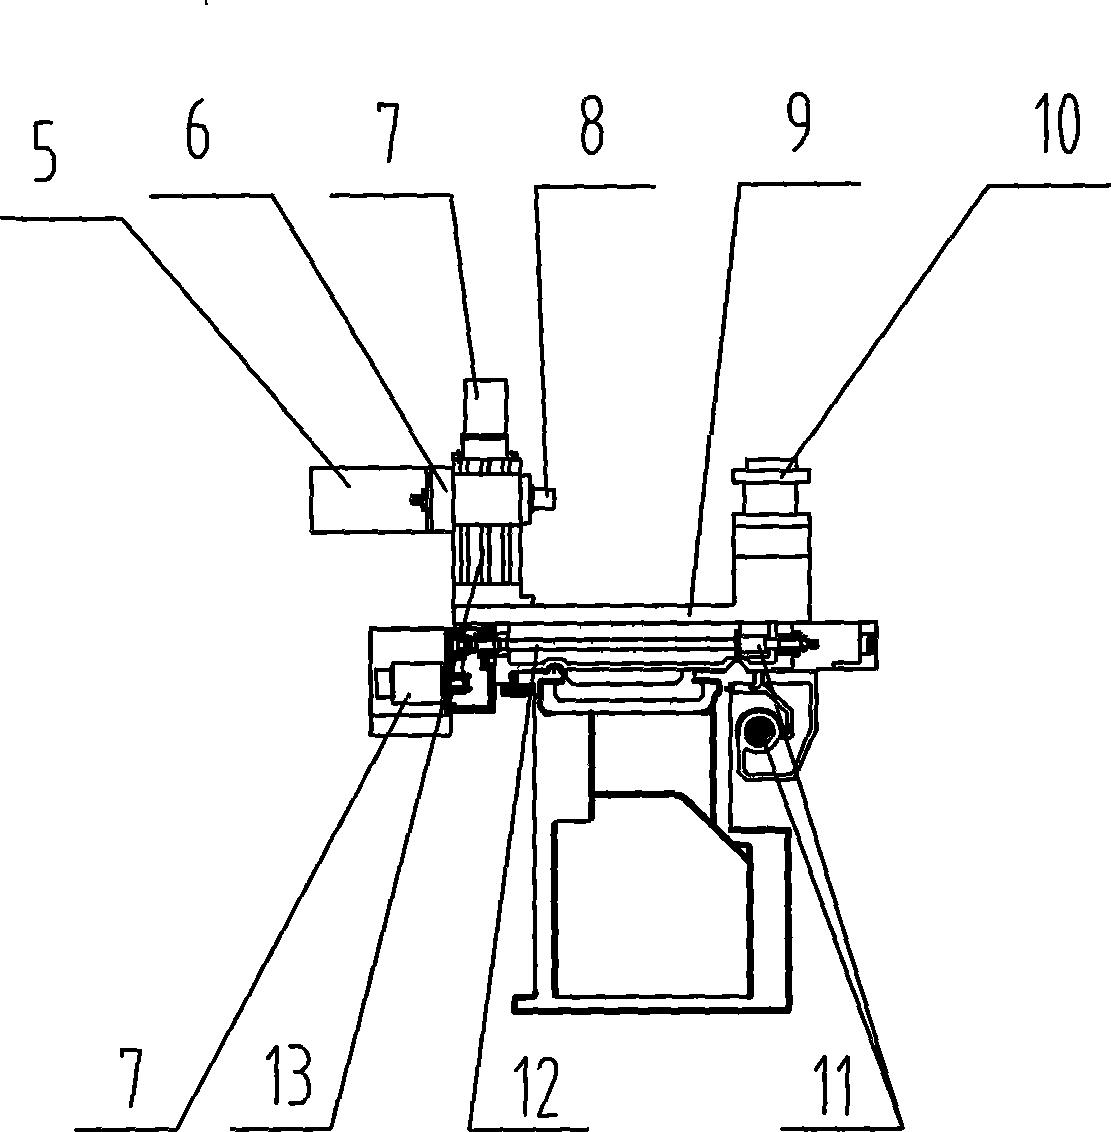 Numerically-controlled milking composite machine tool